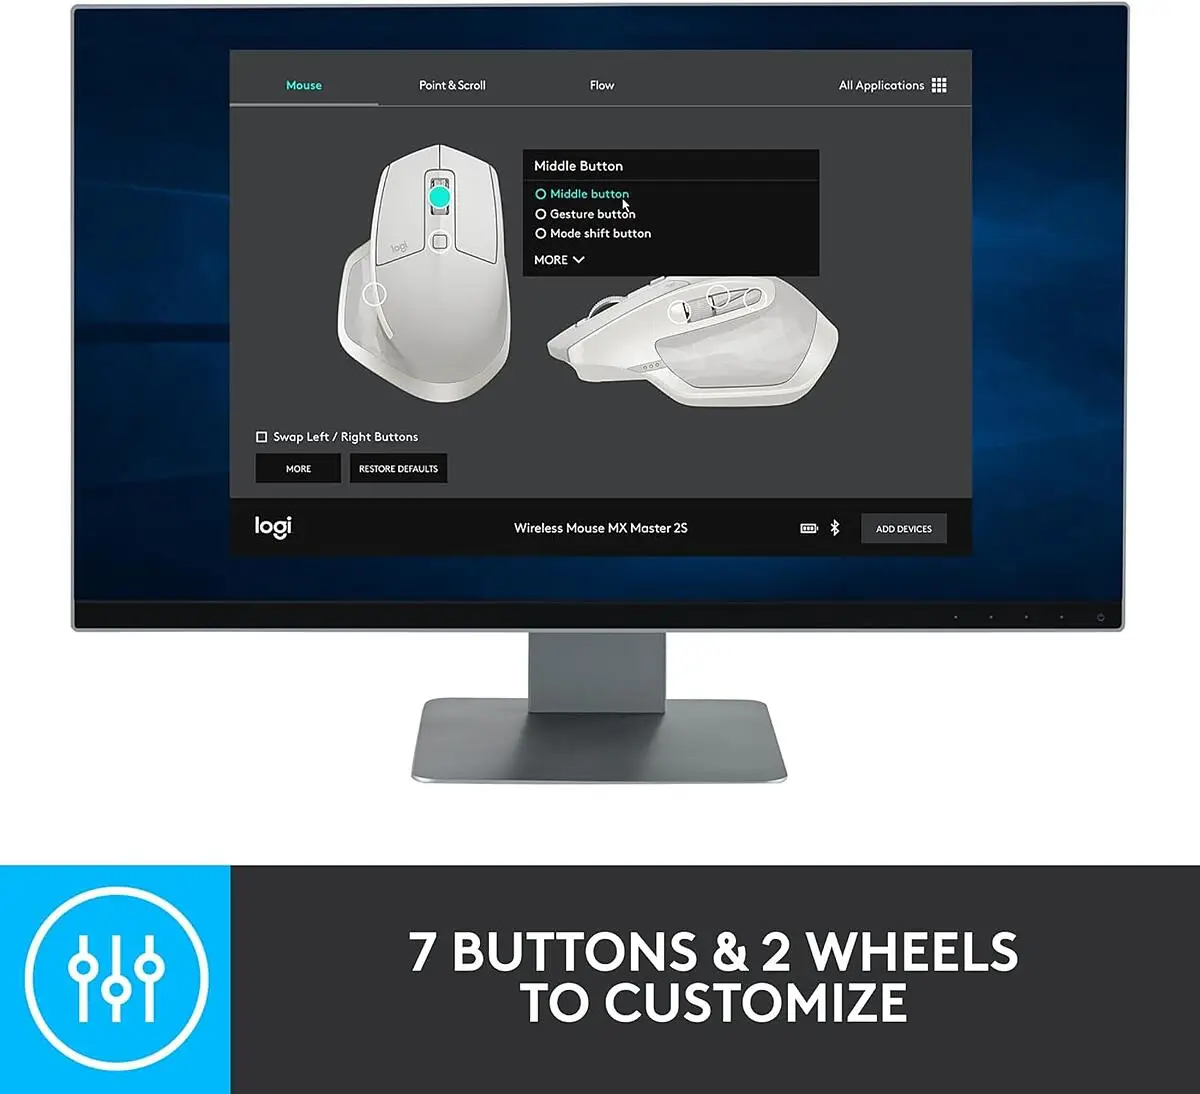 Where/how do I set up mouse buttons? MX Master 2s - Windows Hardware -  McNeel Forum